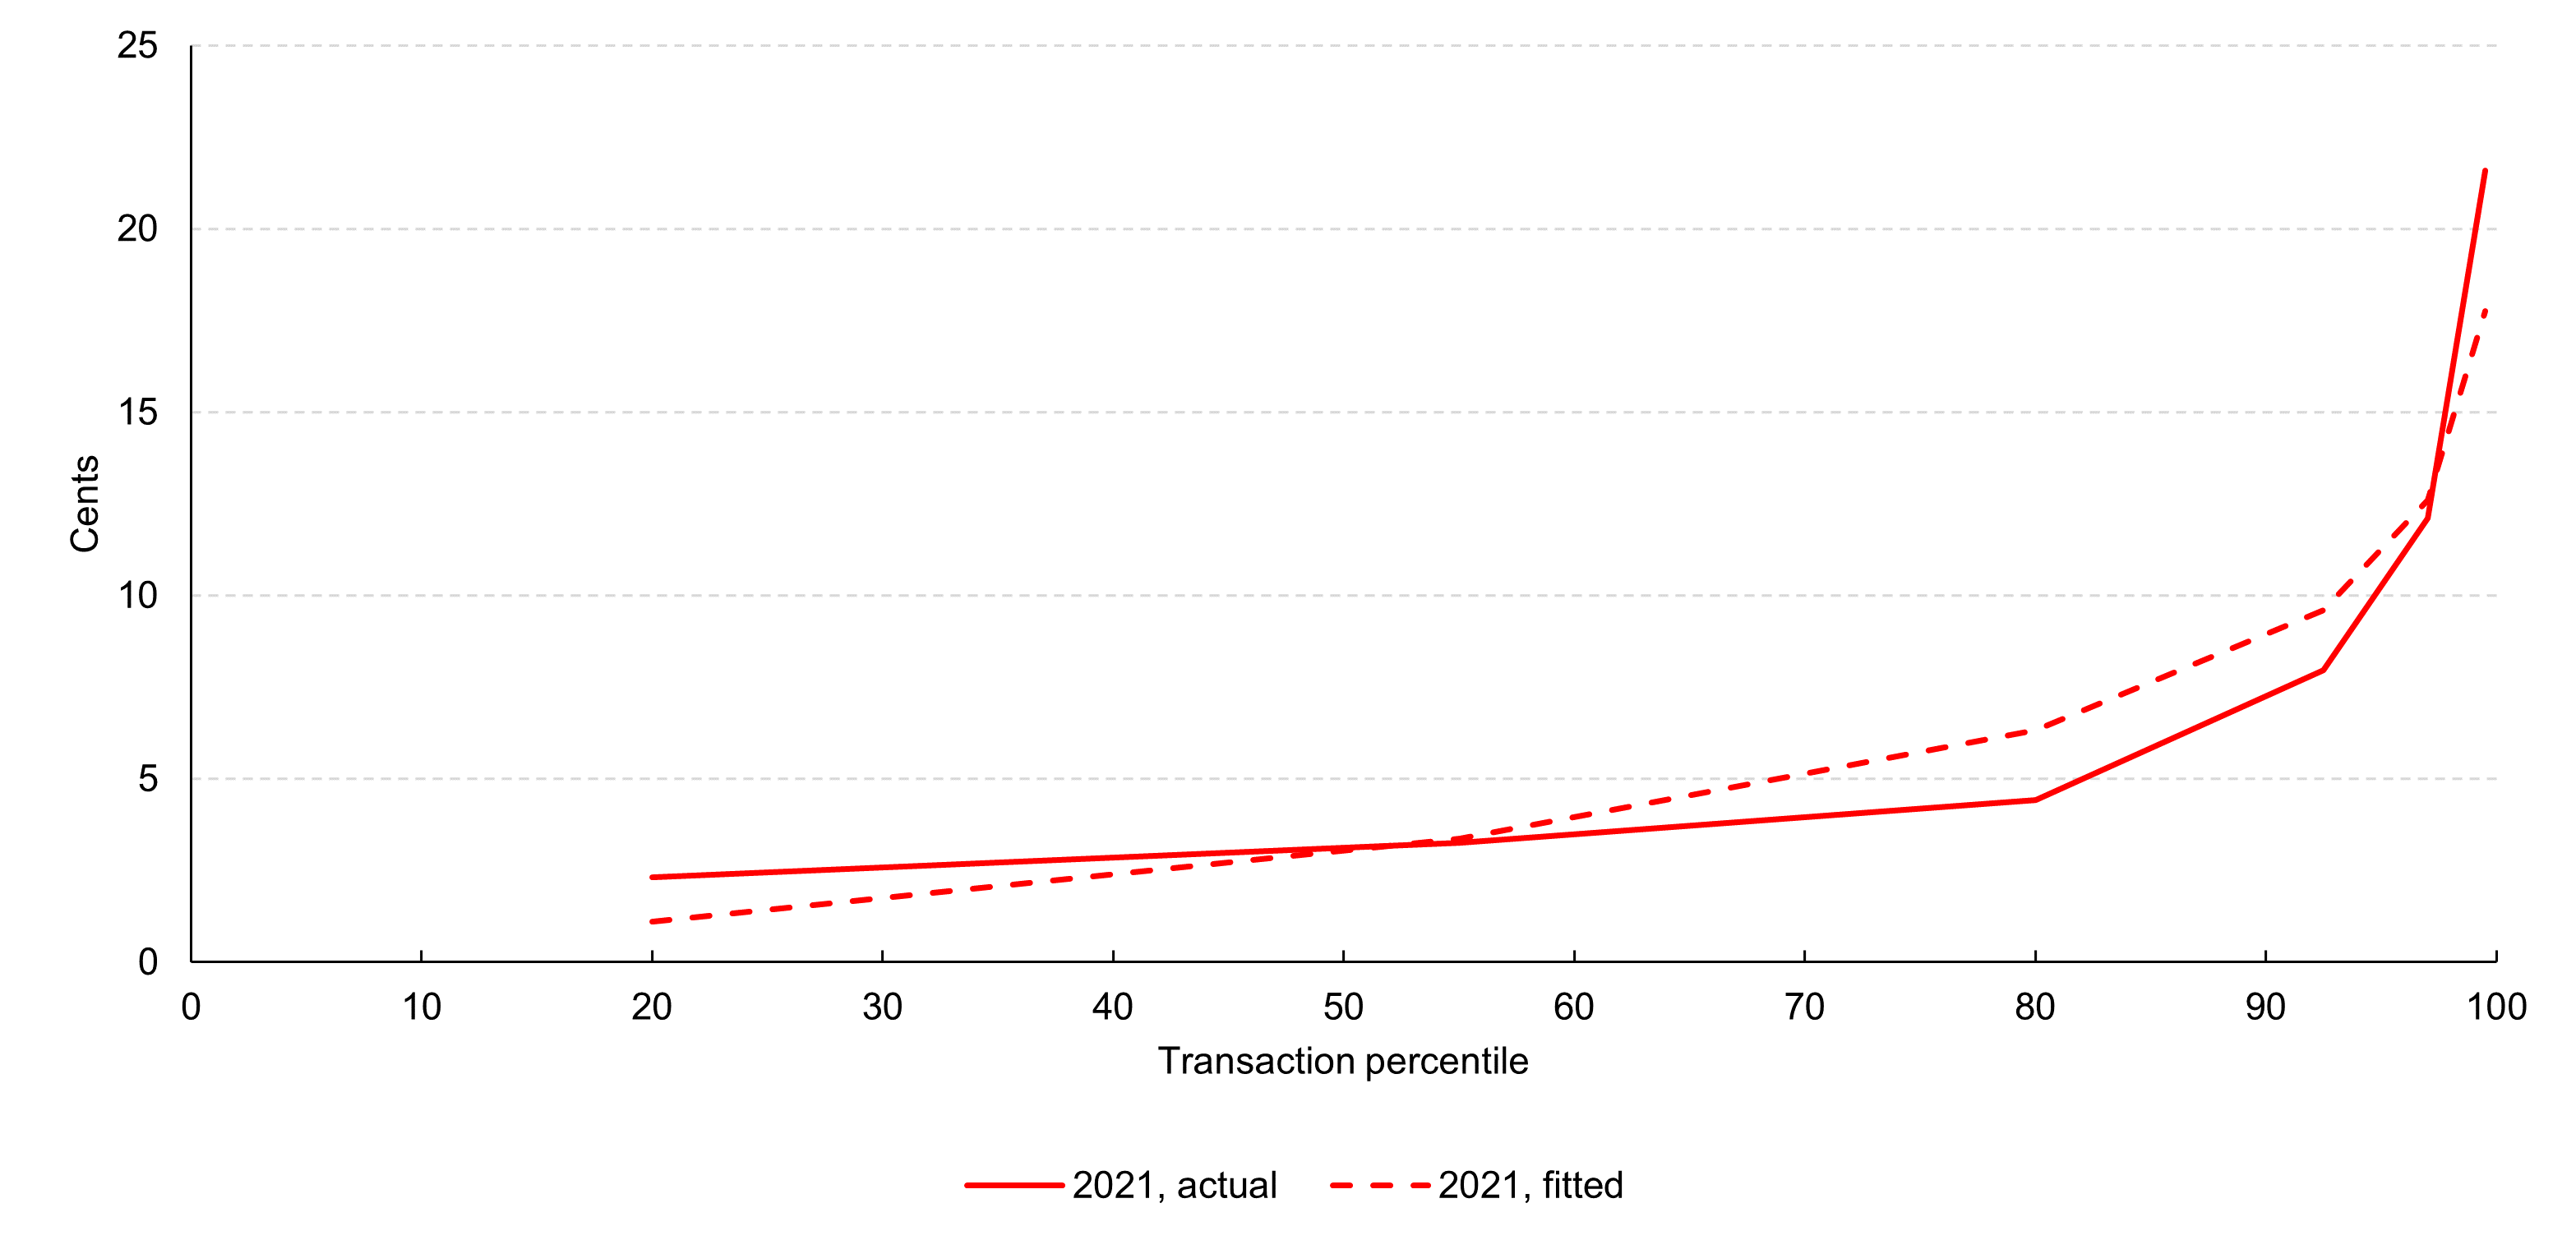 Figure 2: Average per-transaction base component costs of covered issuer transactions performed in 2021, in cents, by transaction percentile range – actual vs. fitted (Weibull) distribution